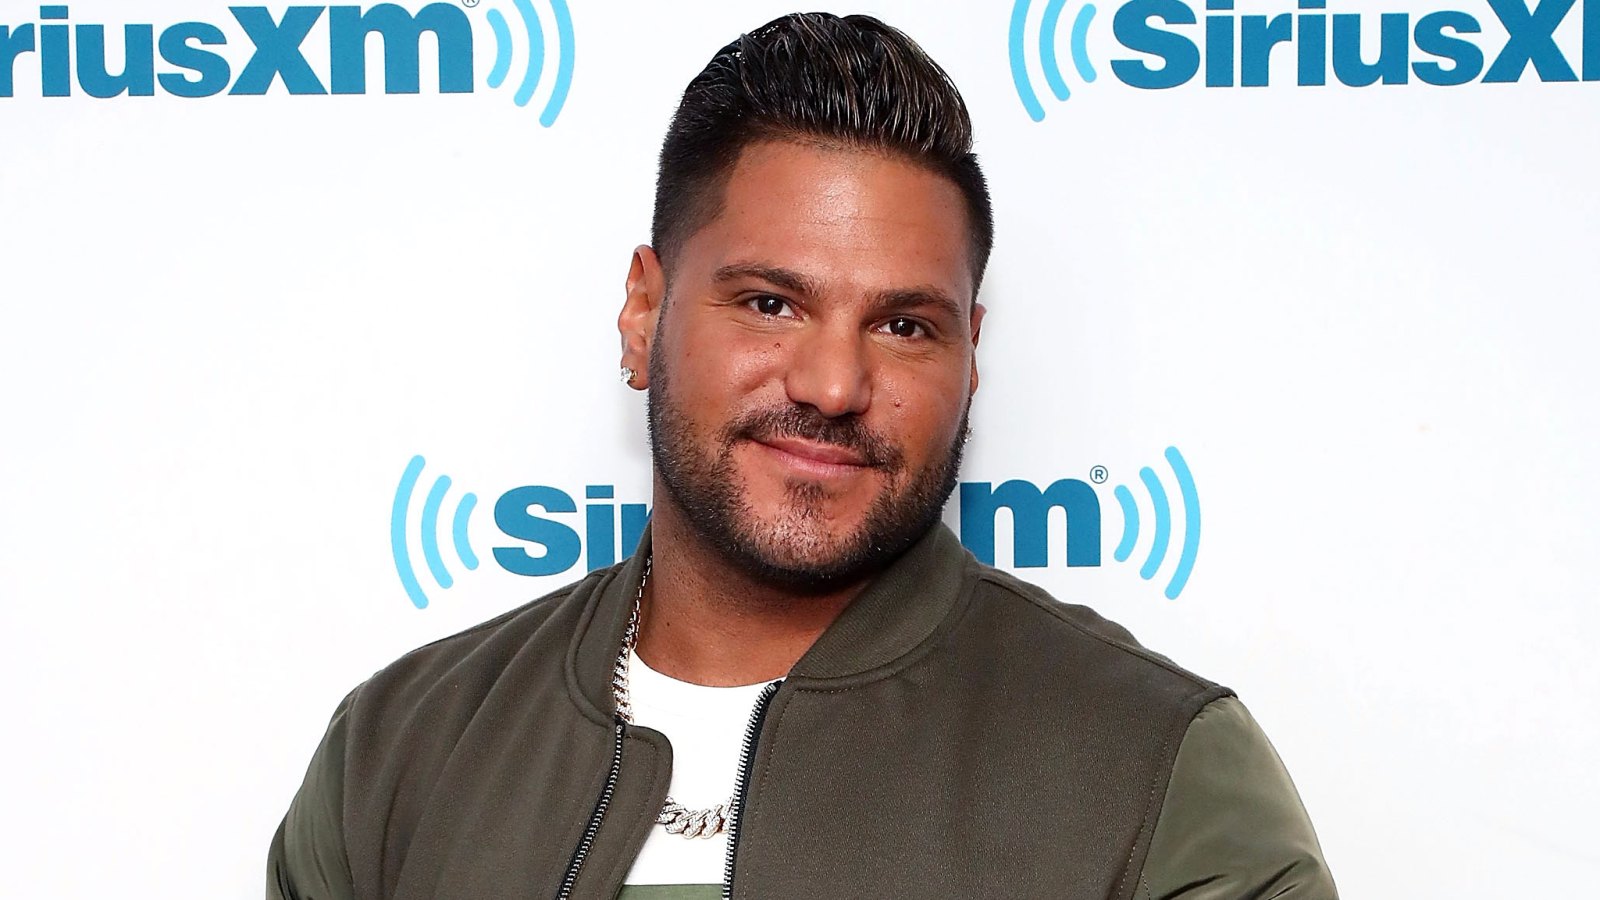 Ronnie Ortiz-Magro Reveals Facial Injuries After Jen Harley Fight